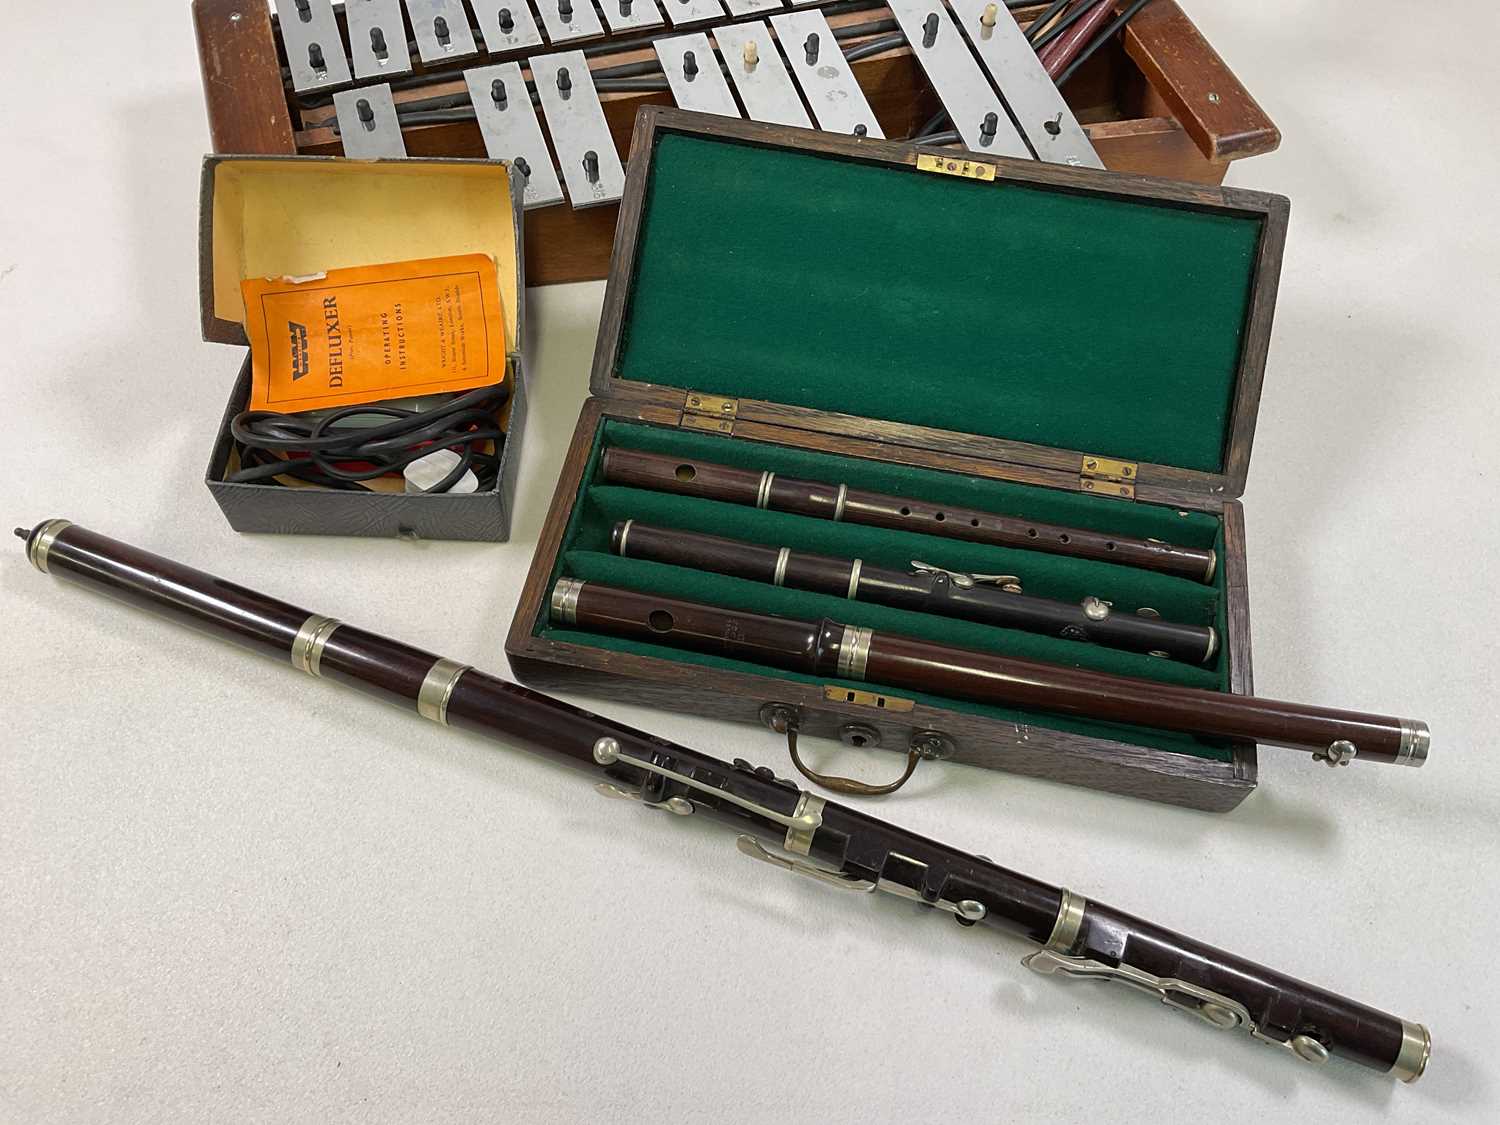 A flute by Rushworth and Dreaper, three piccolos (in box), and a xylophone. - Image 2 of 3